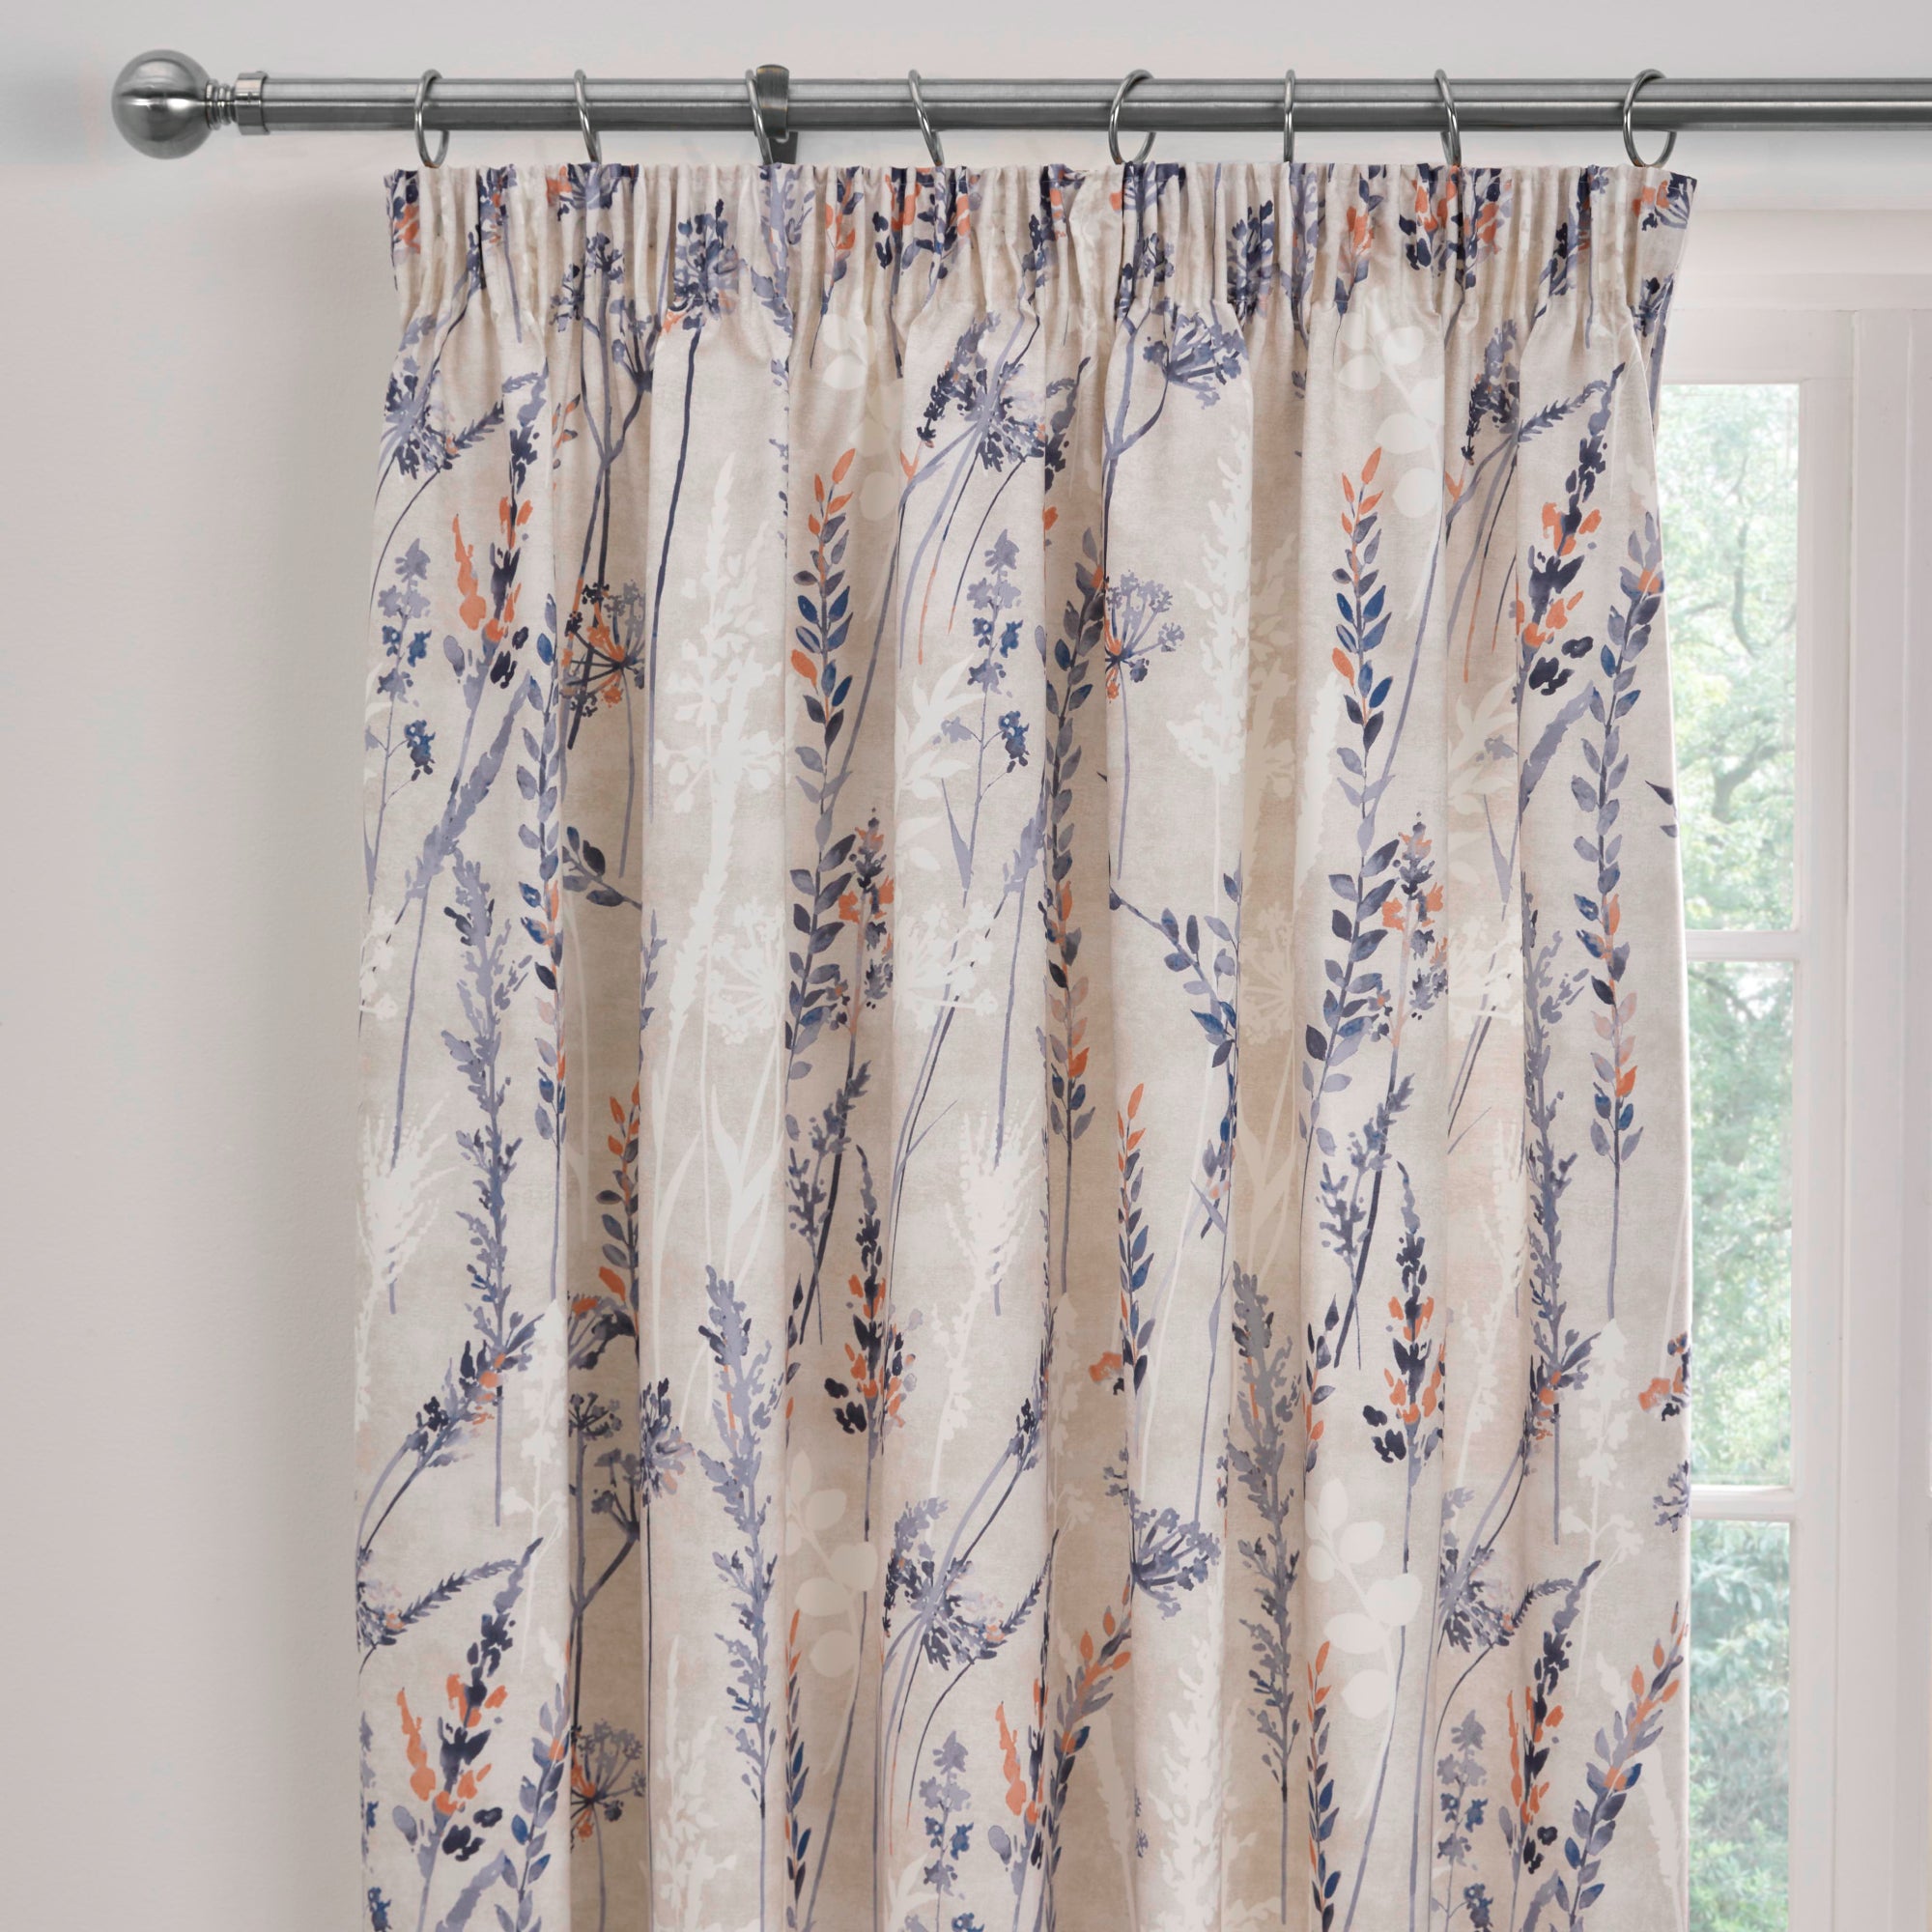 Pair of Pencil Pleat Curtains With Tie-Backs Wild Stems by Dreams And Drapes Design in Blue